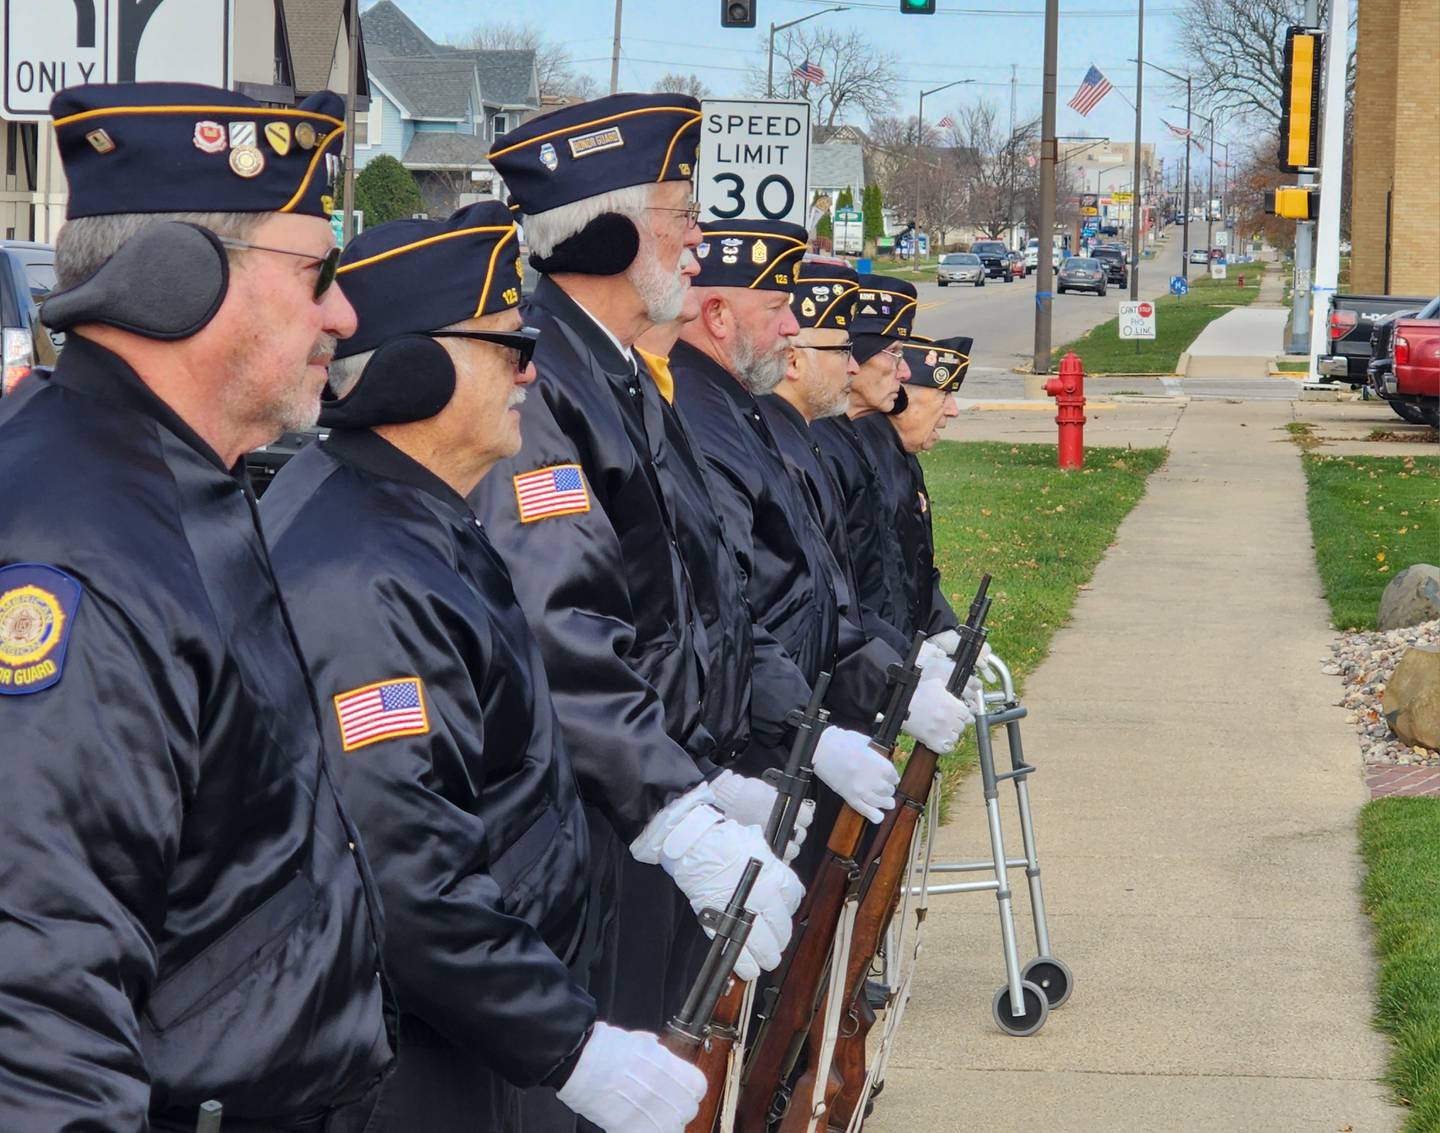 As Friday morning brought more winter-like weather to the Illinois Valley, the cold temperatures and strong winds were not enough to deter members of local veterans organization from participating in a special Veterans Day ceremony.